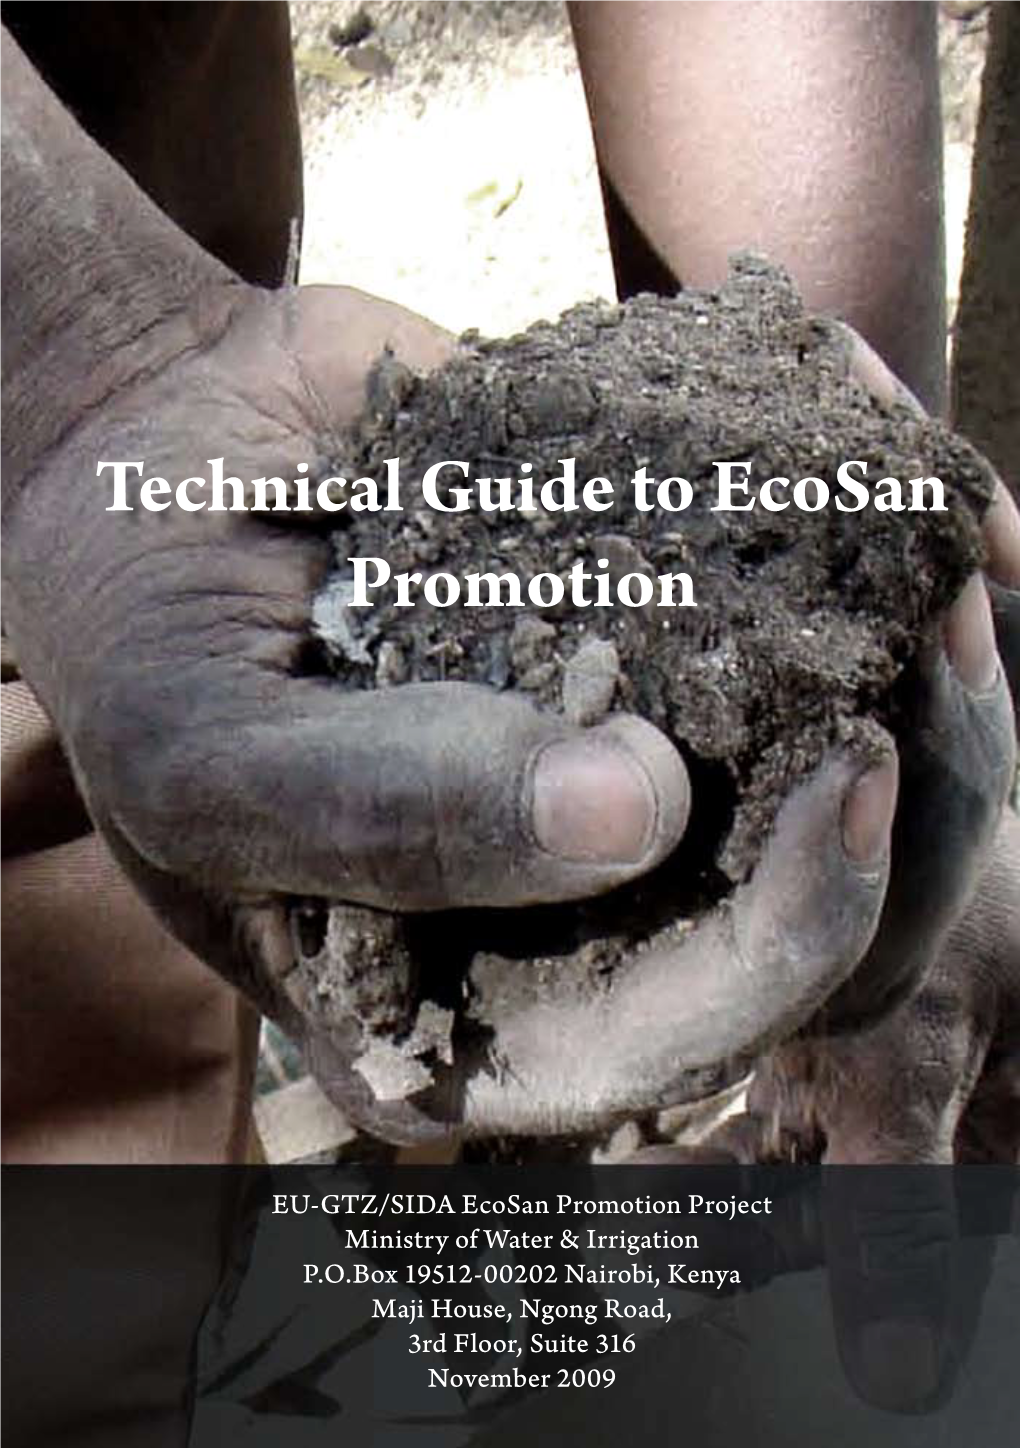 Technical Guide to Ecosan Promotion